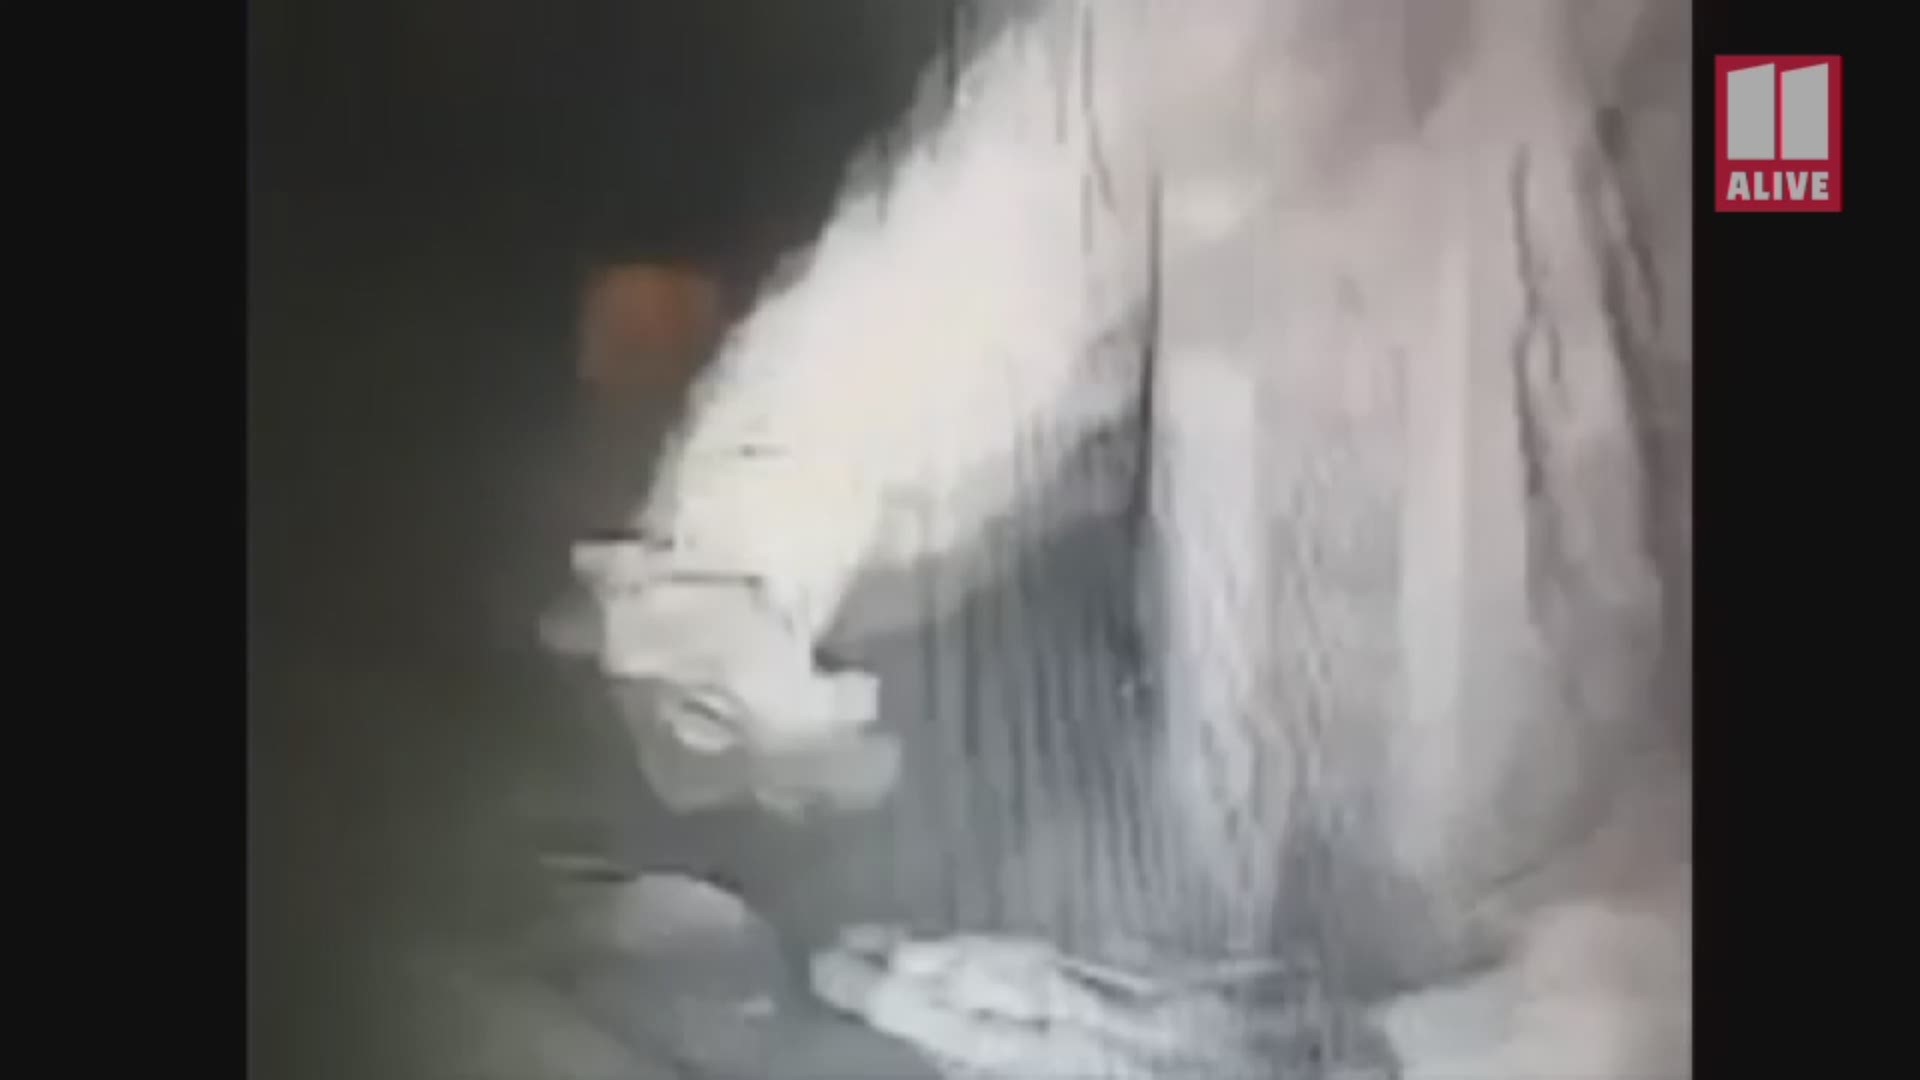 Police need help to find a suspect who allegedly tried to set a fire at the Chaos Haunted House in Carrollton, Georgia.